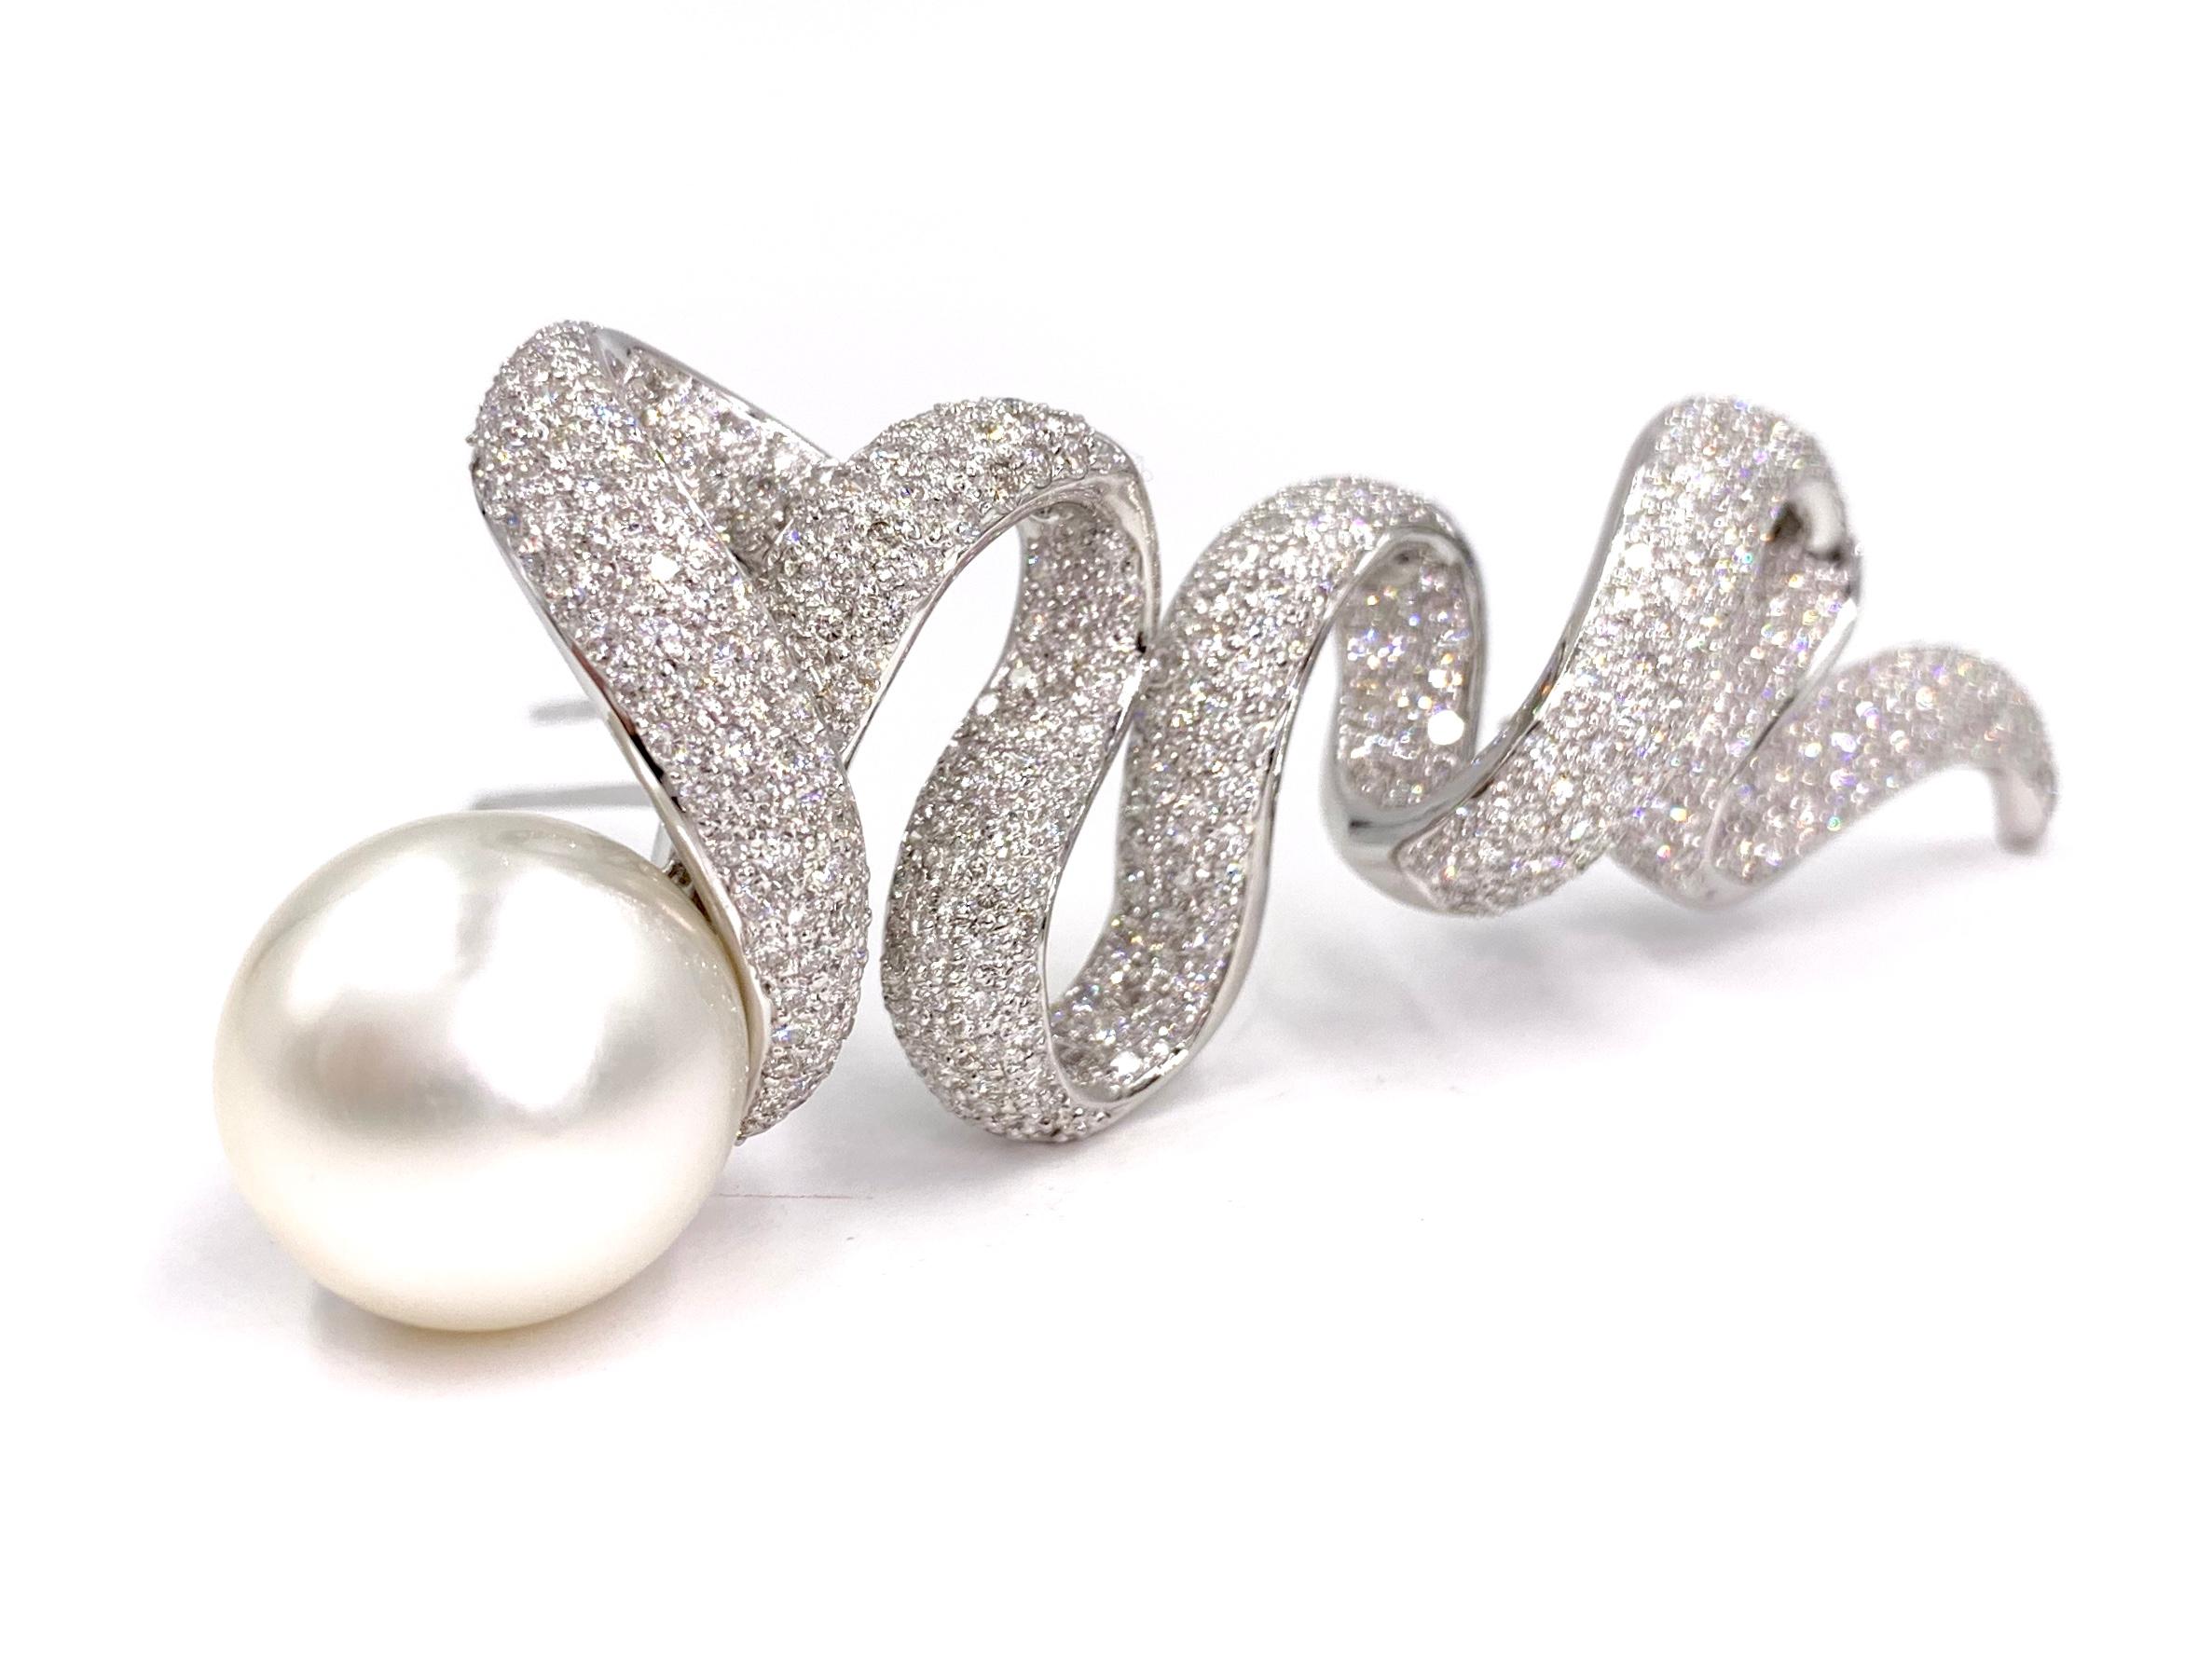 Contemporary 18 Karat White Gold South Sea Pearl and Diamond Large Swirl Brooch